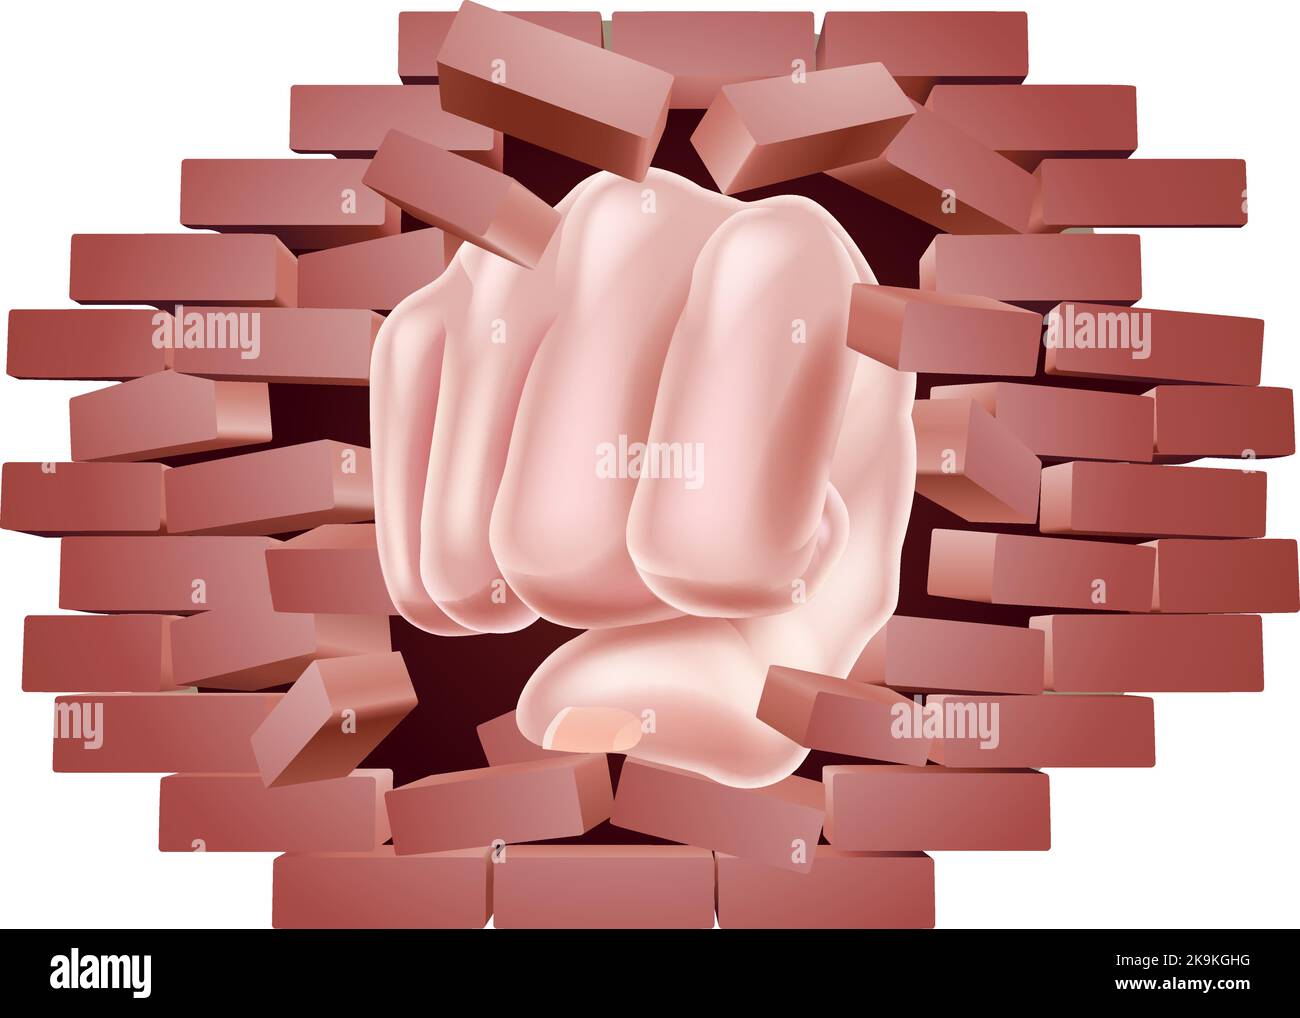 Fist Punching Through Brick Wall Concept Stock Vector